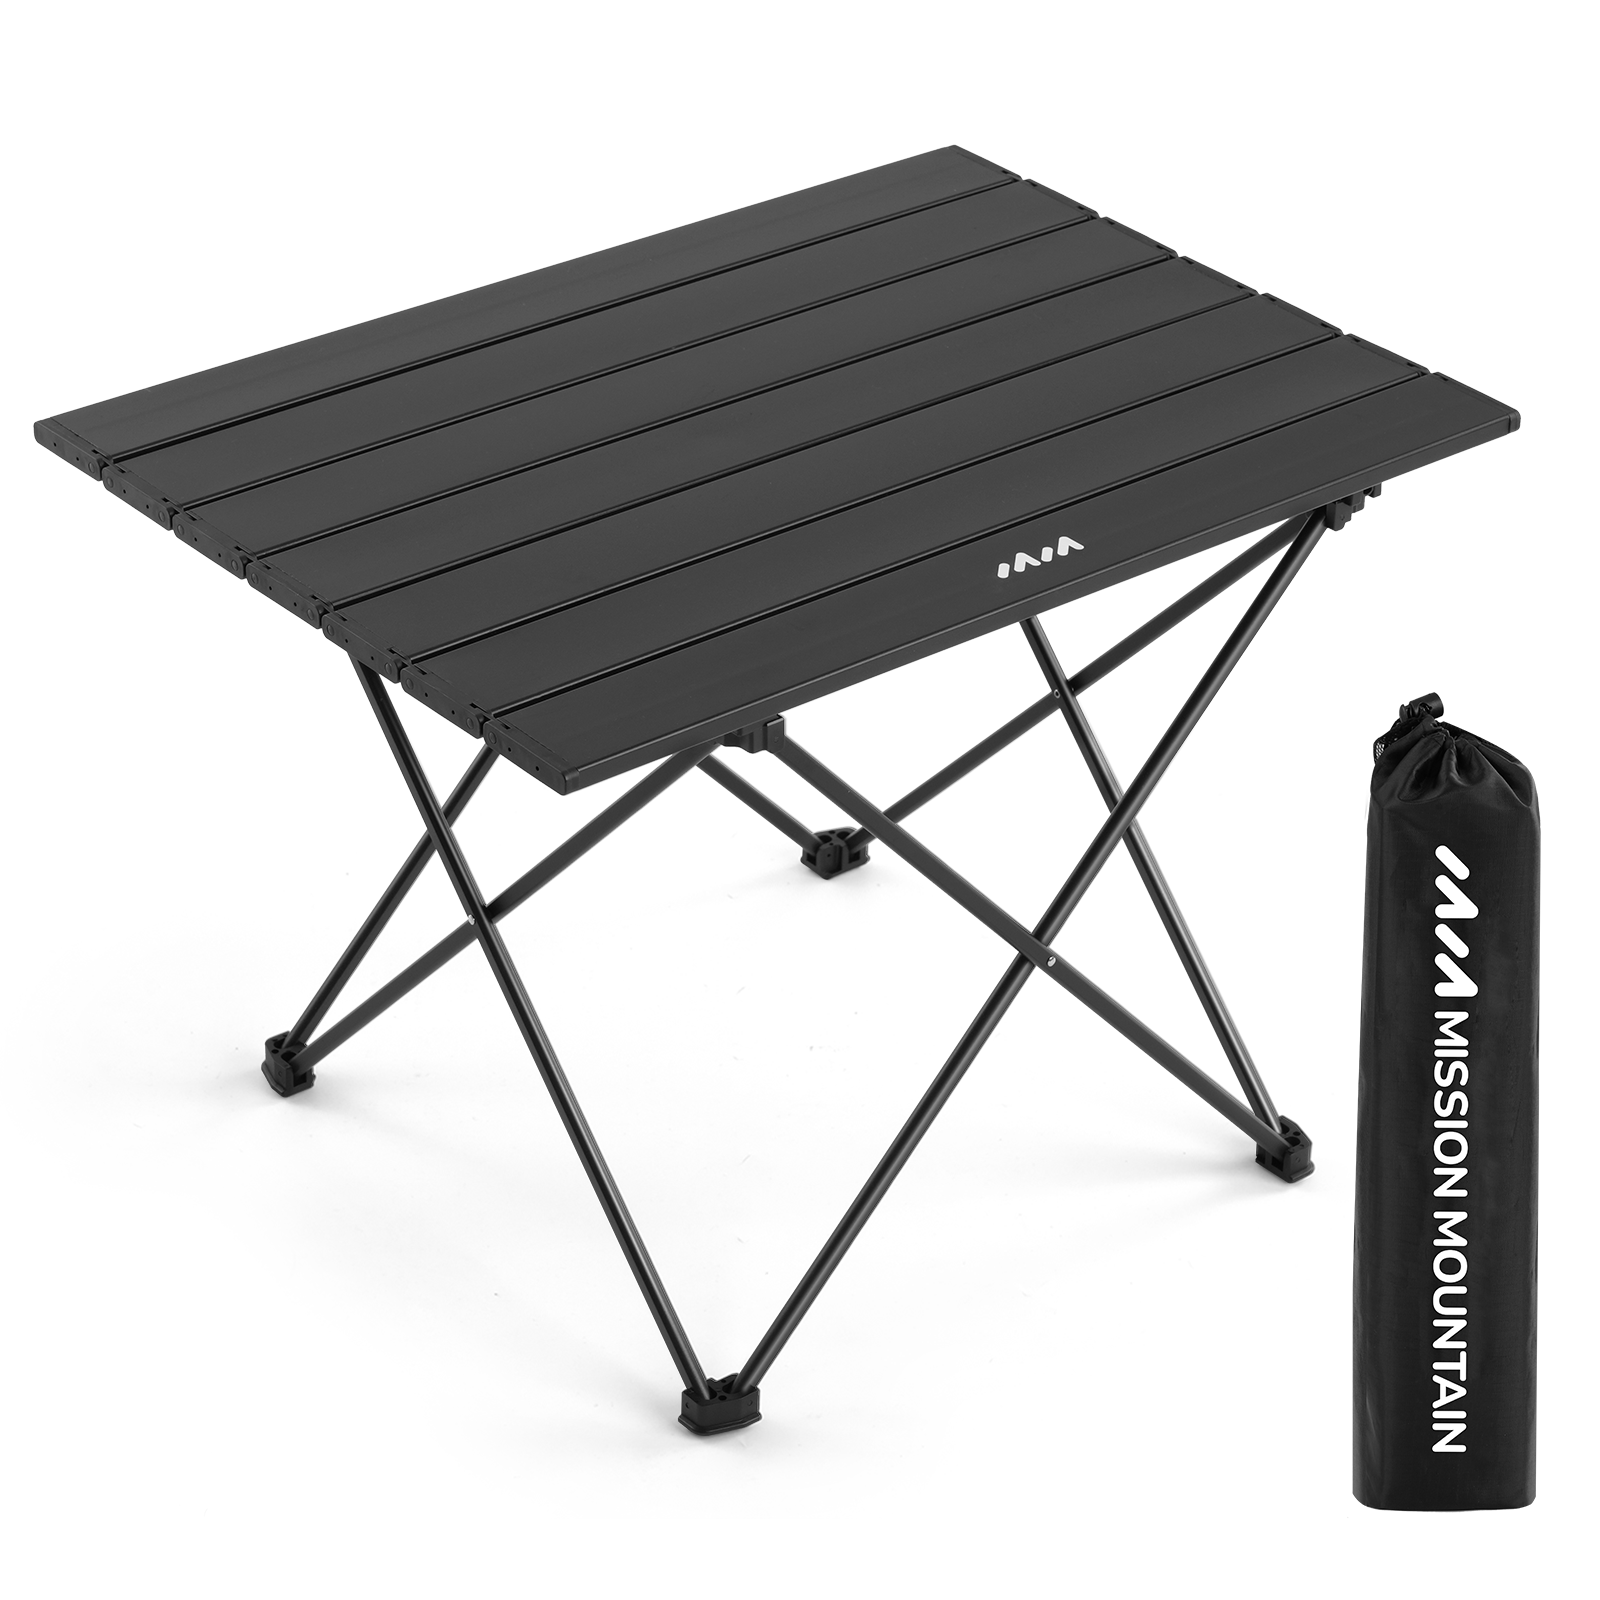 UltraPort Camping Table